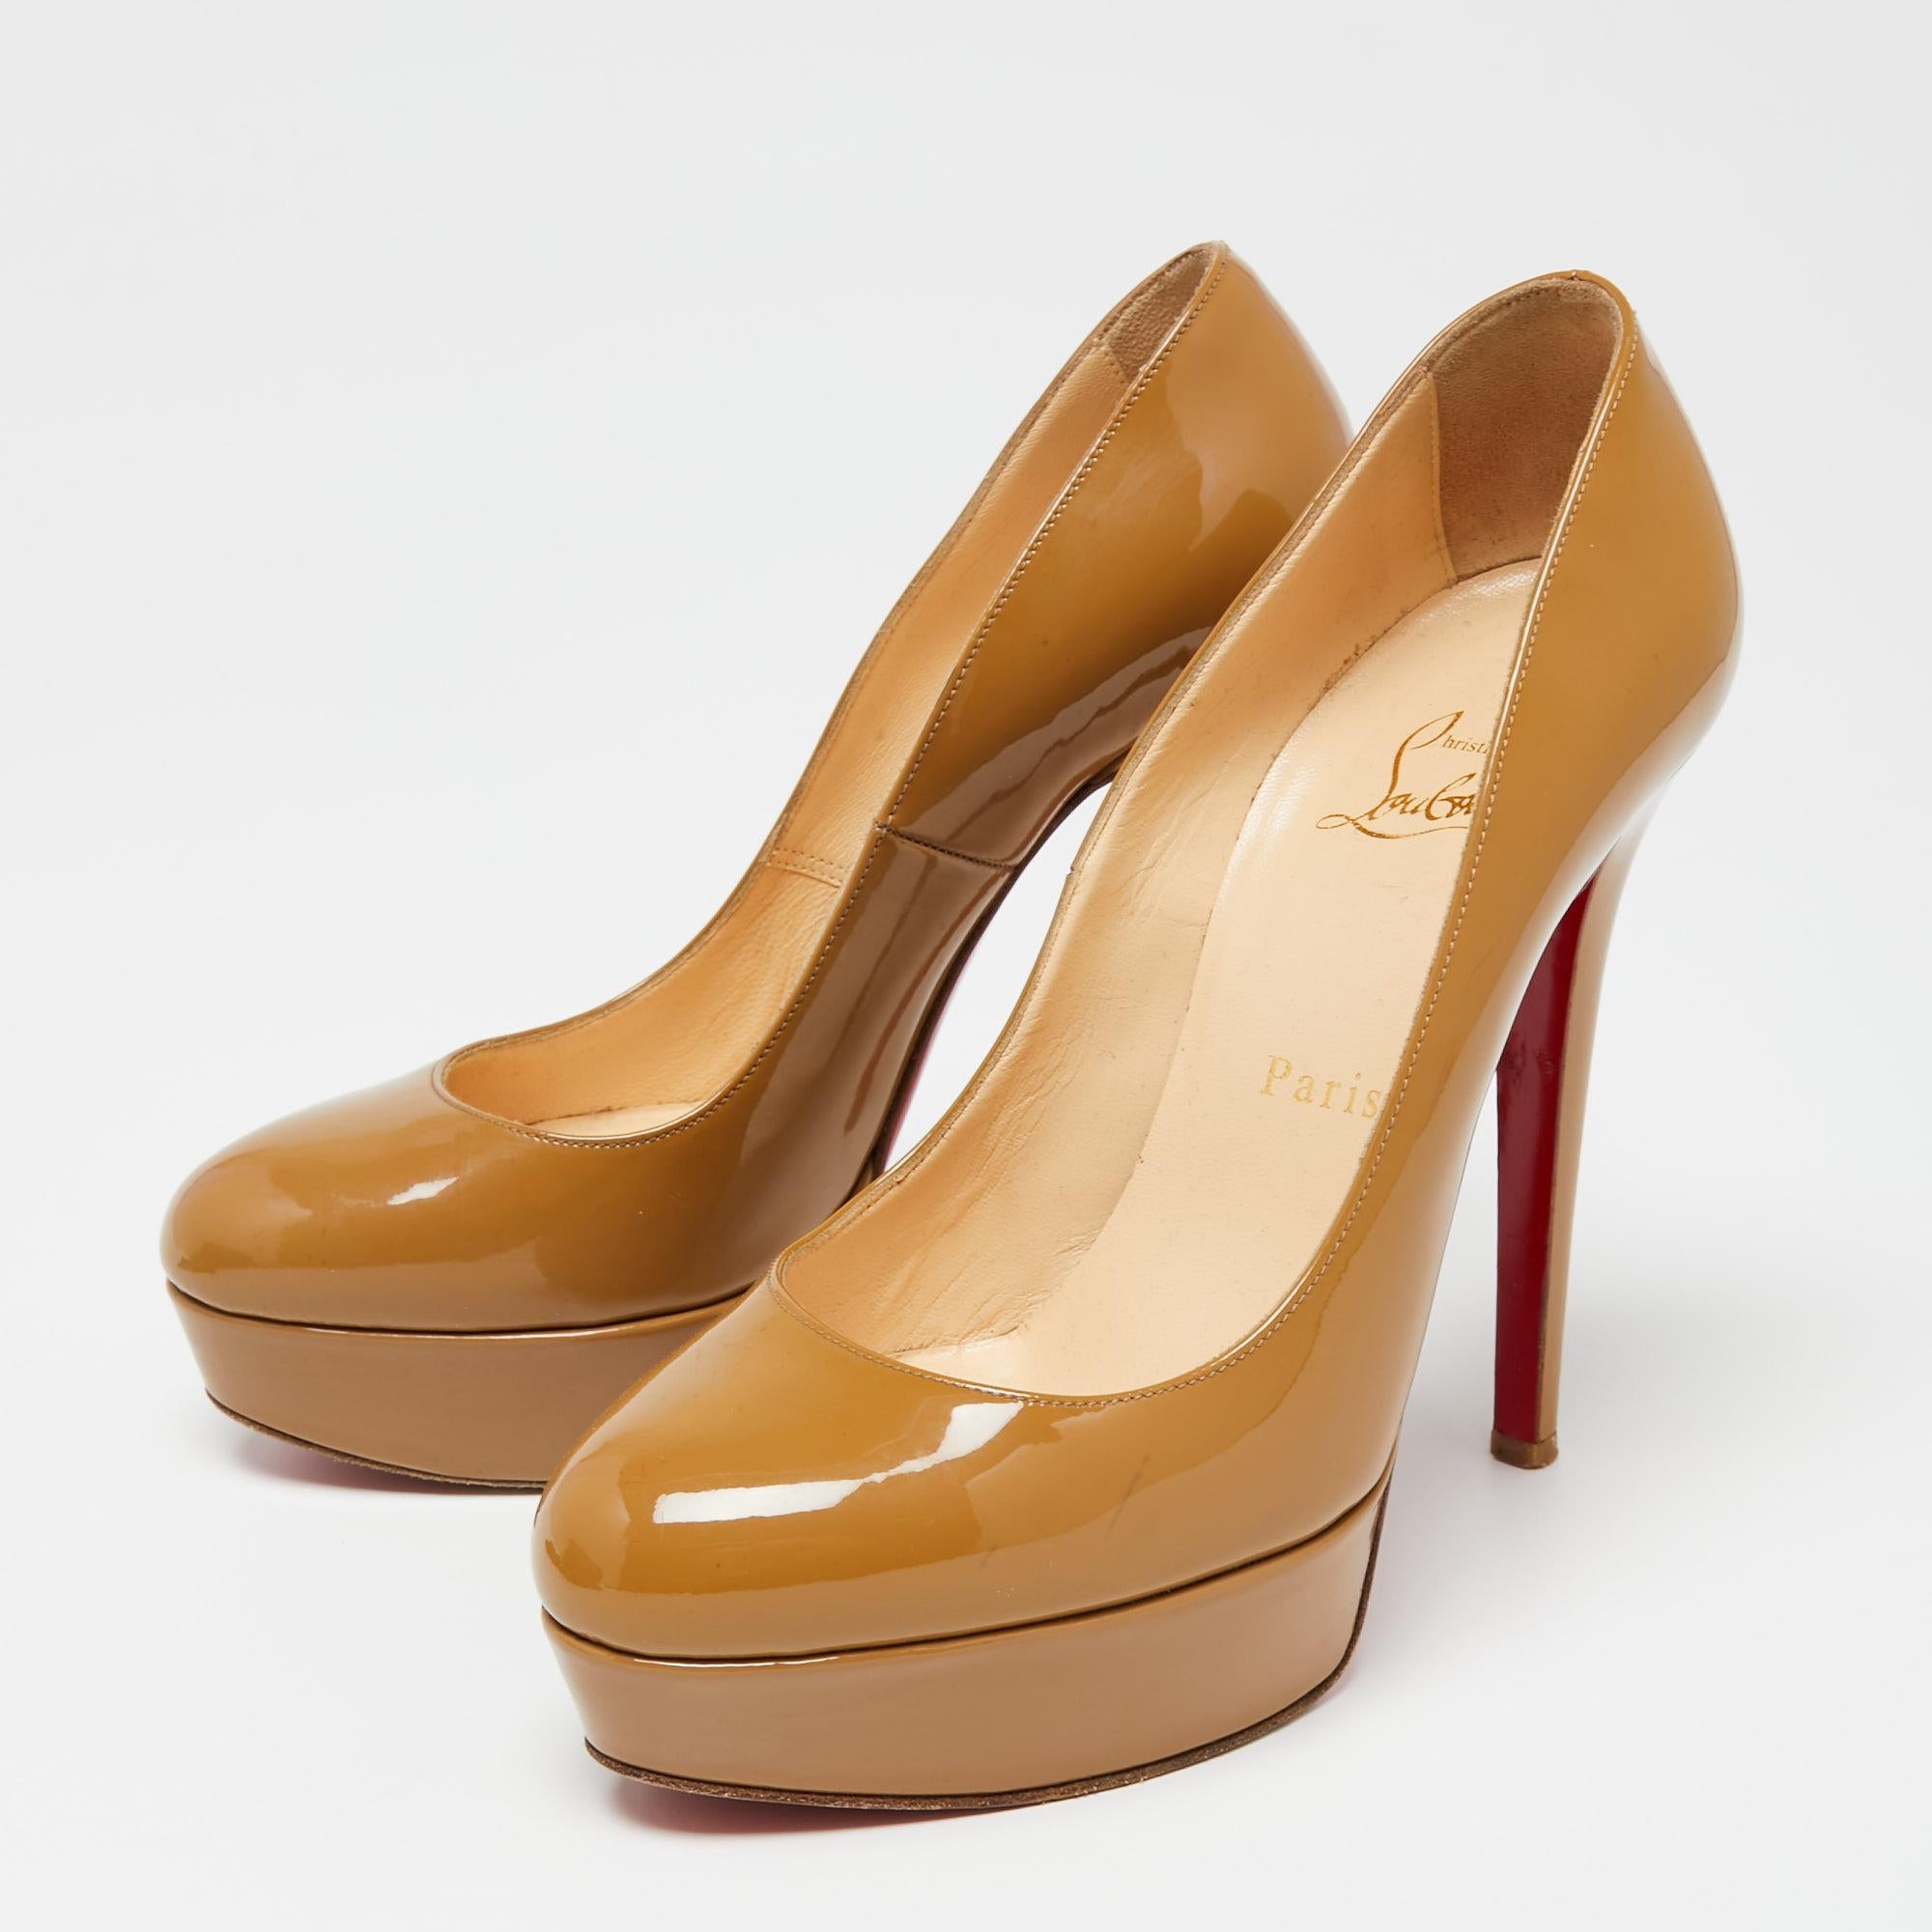 A classic to add to one's shoe collection is this pair of pumps. These Christian Louboutin beauties are covered in patent leather and are styled with platforms, 12.5 cm heels, and signature red soles. Add these beige pumps to your closet today and